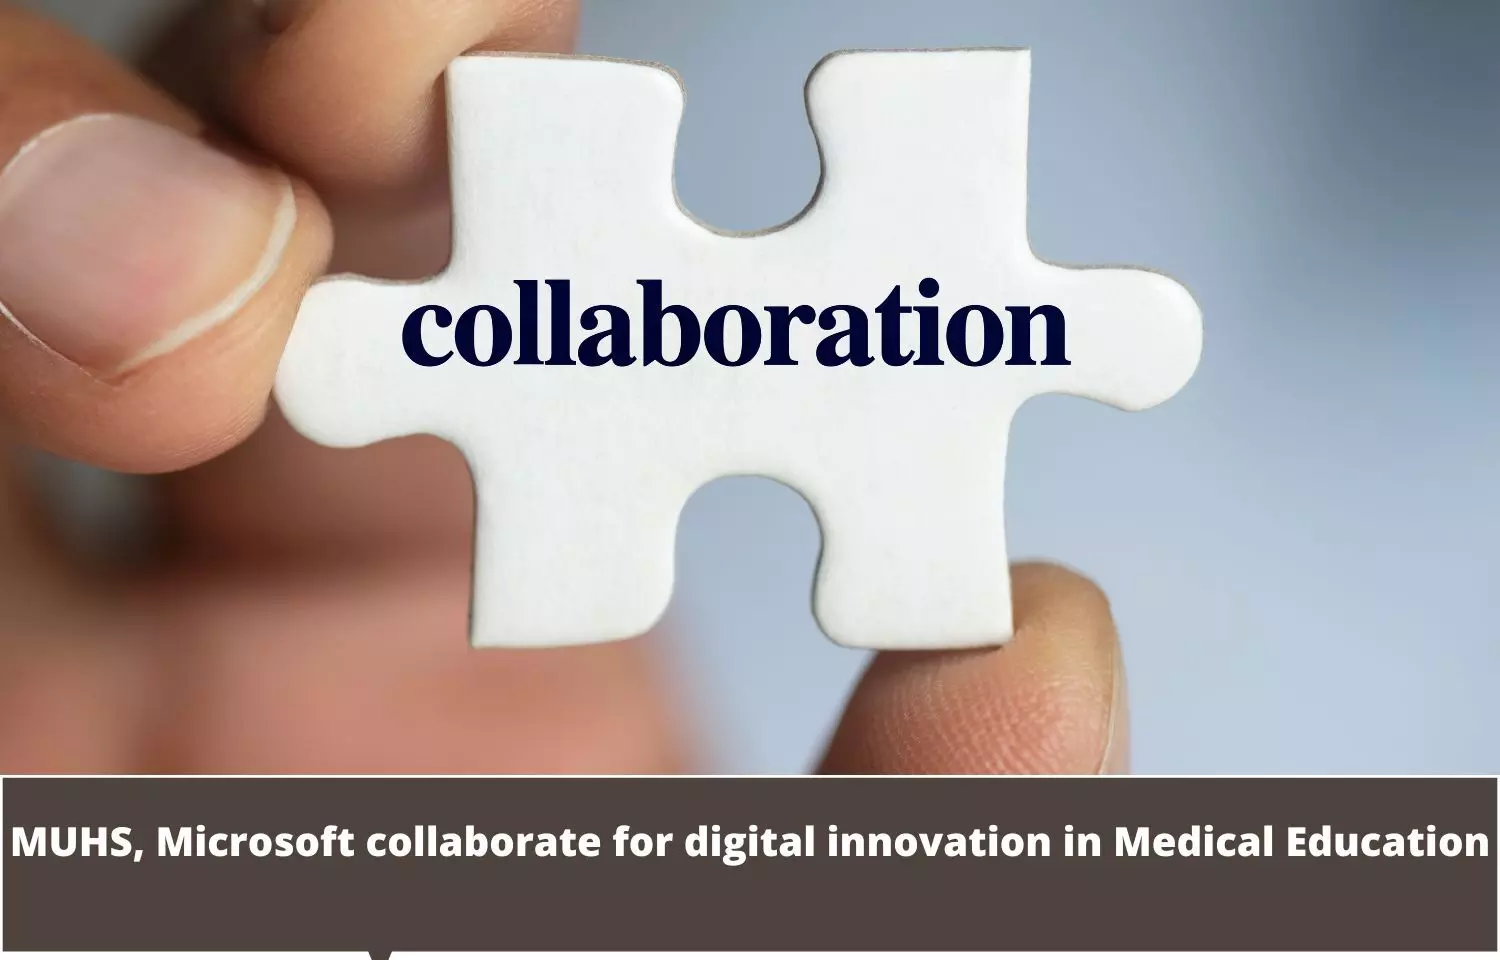 MUHS, Microsoft collaborate for digital innovation in Medical Education